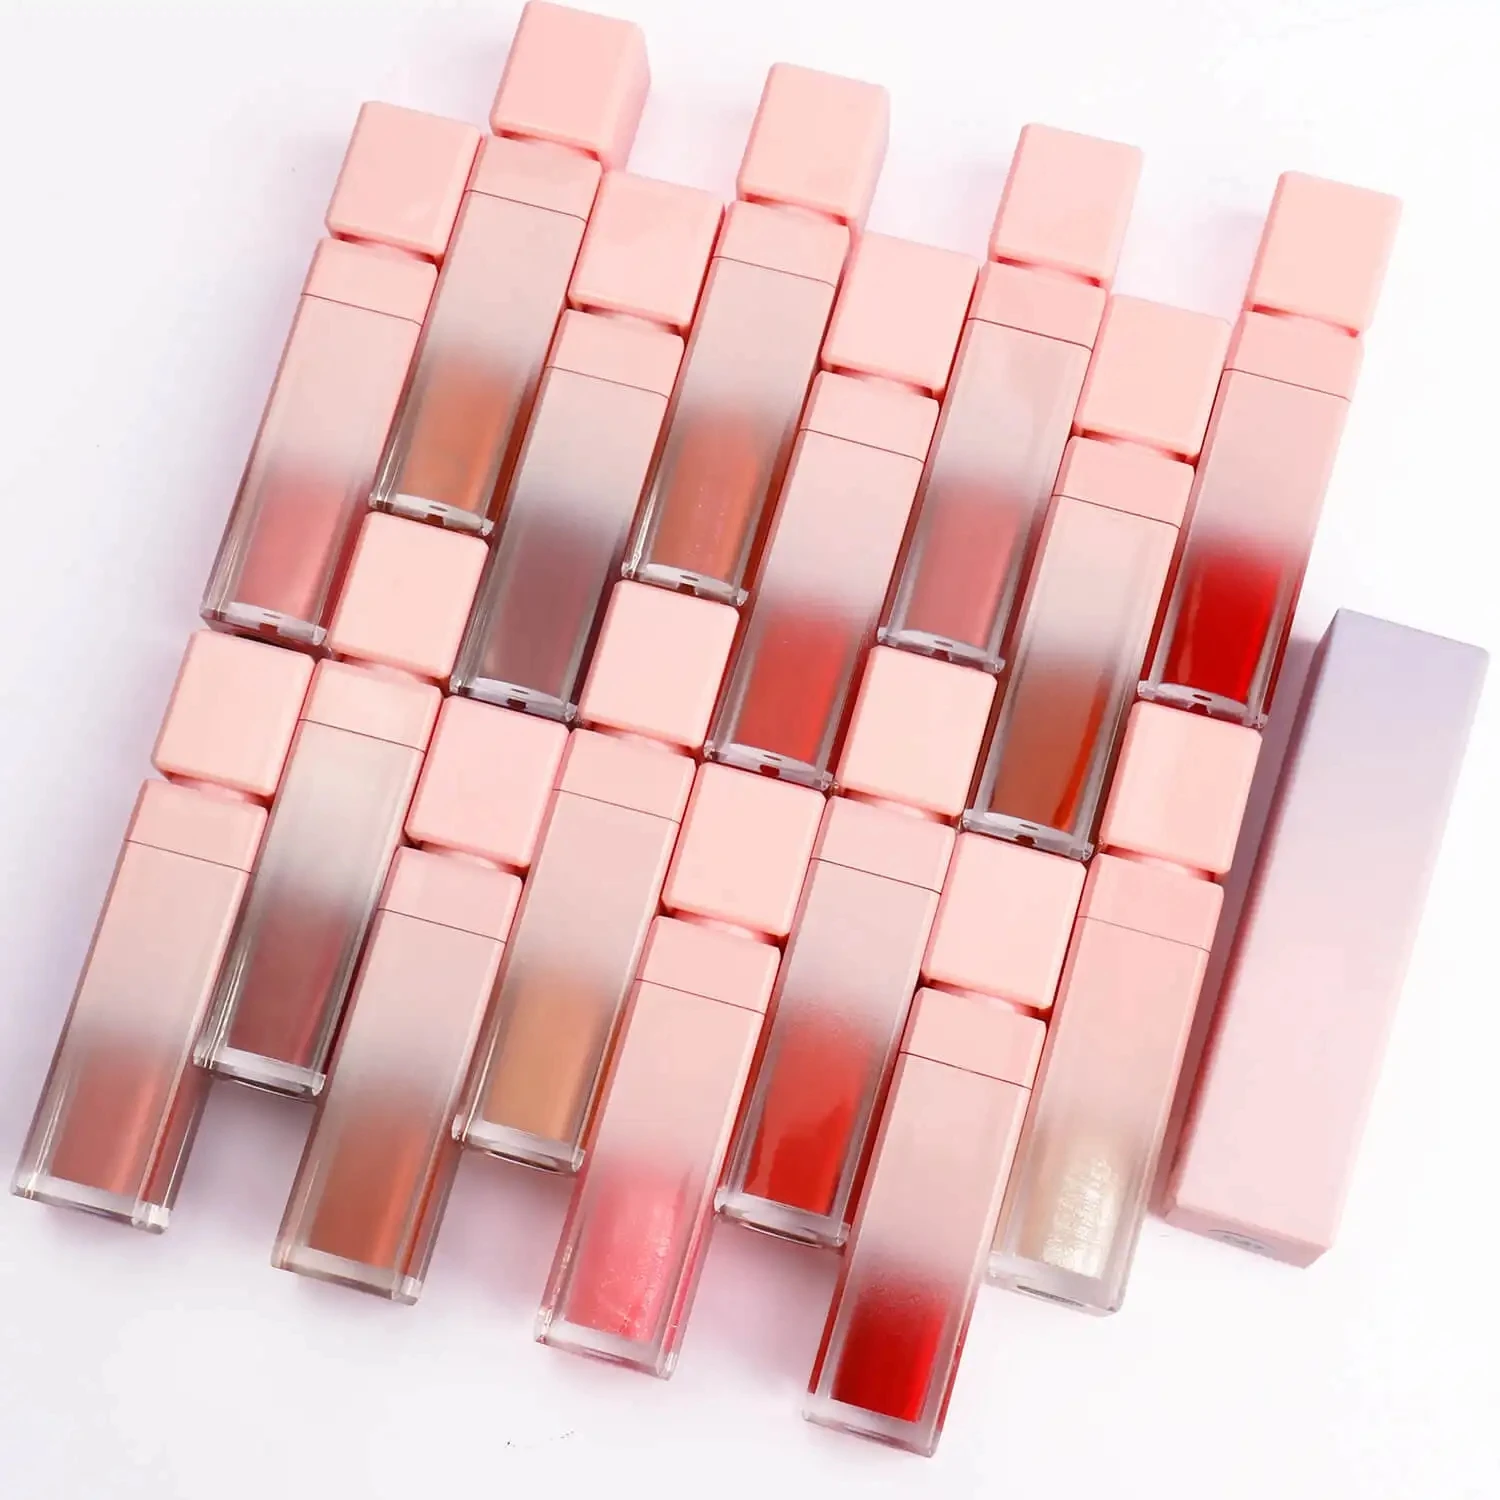 

HMU Custom Cosmetic High Pigment Shimmer Clear Glossy Lip Gloss Private Label Low MOQ Make Up Lip Gloss